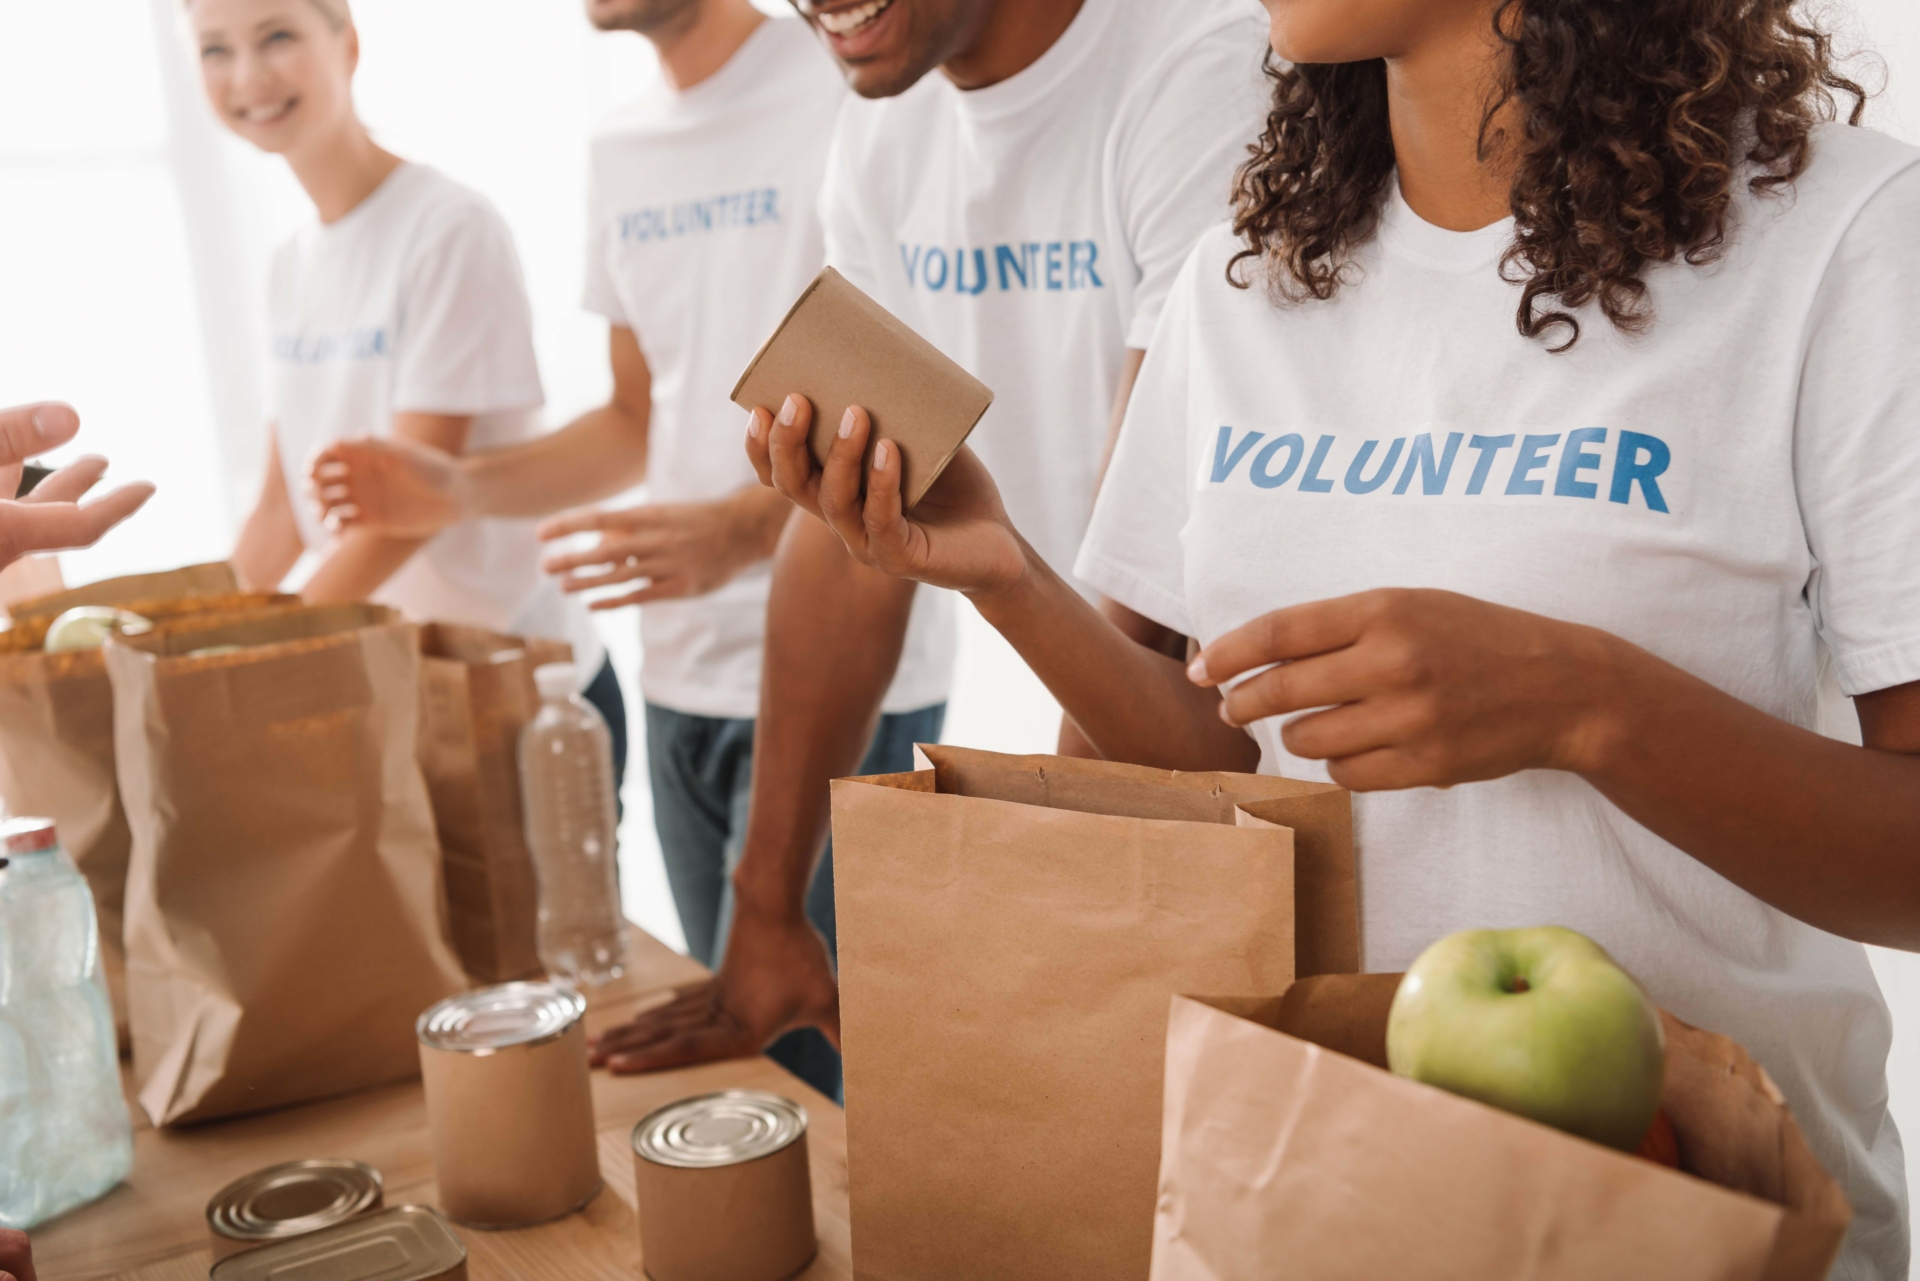 Science proves volunteering is good for you